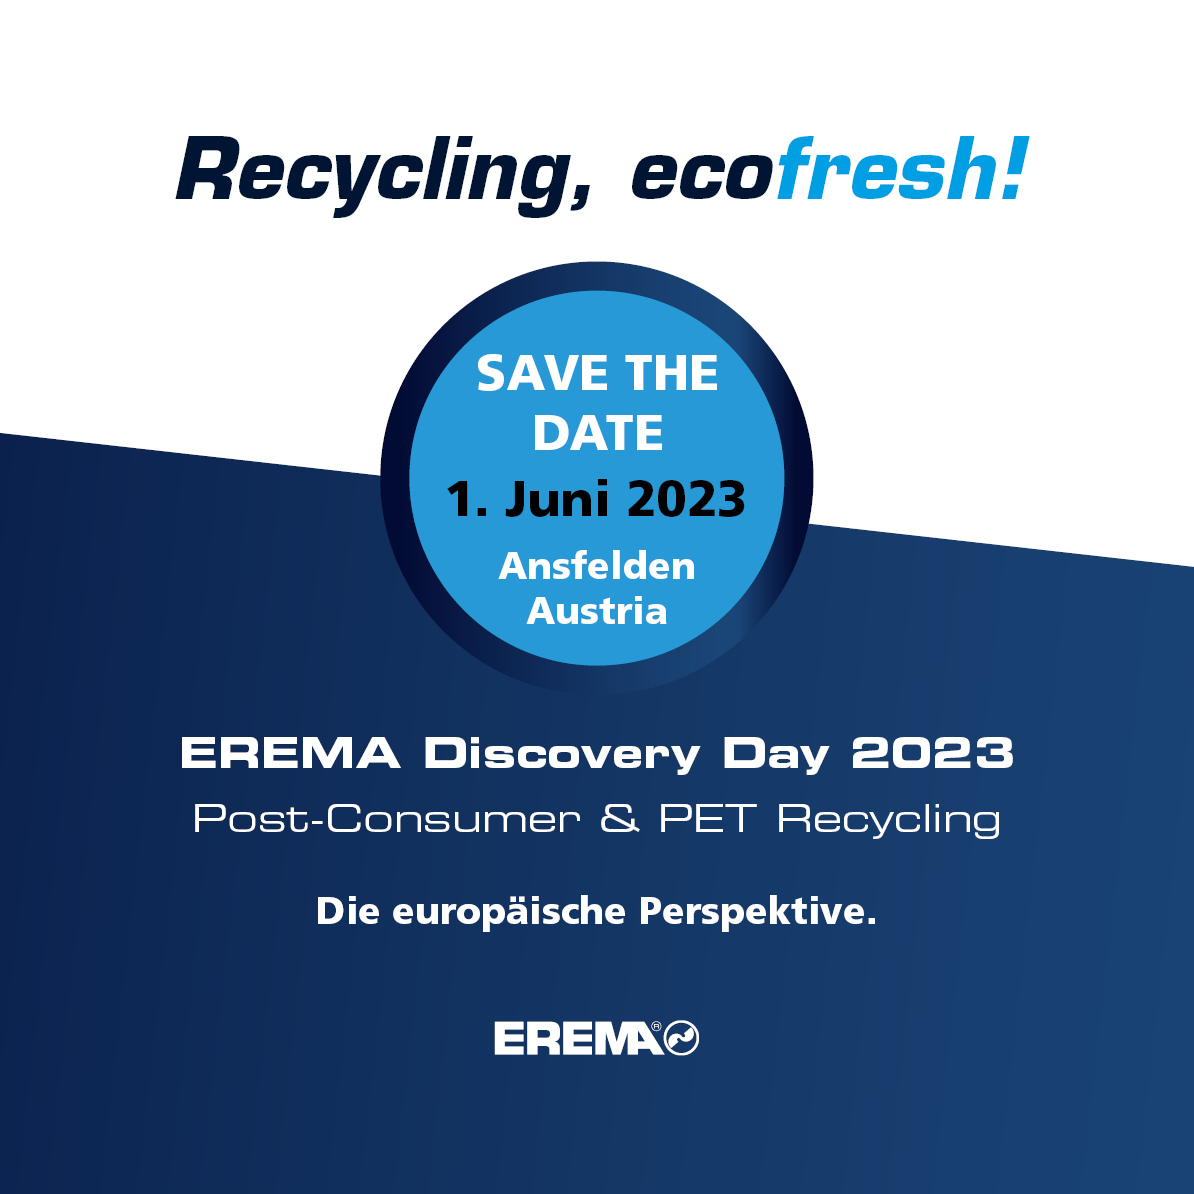 EREMA Discovery Day